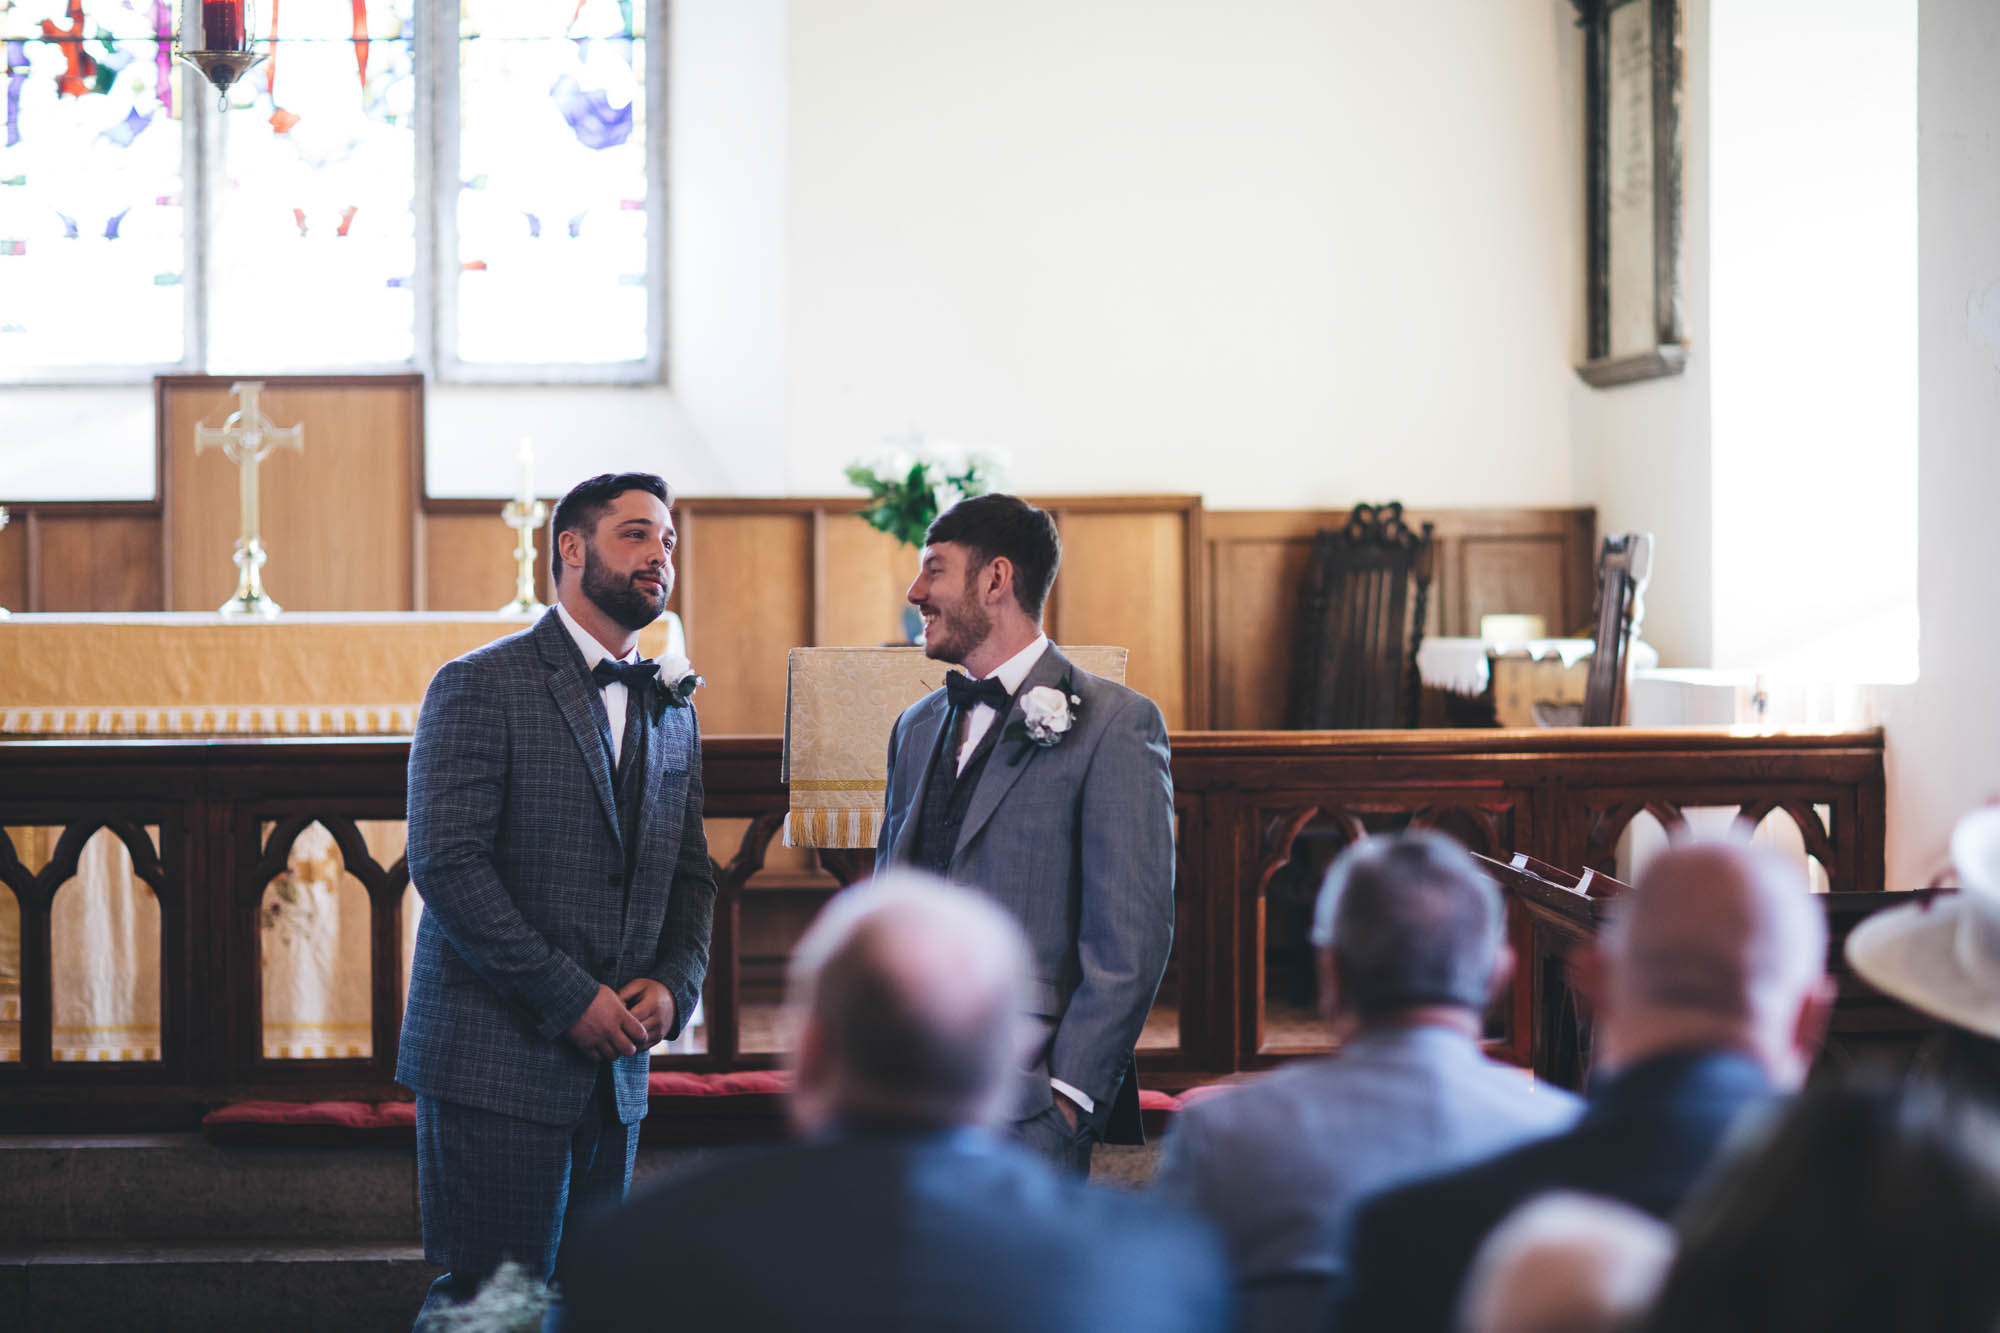 Groom and Best Man share a joke at the altar before the wedding ceremony starts